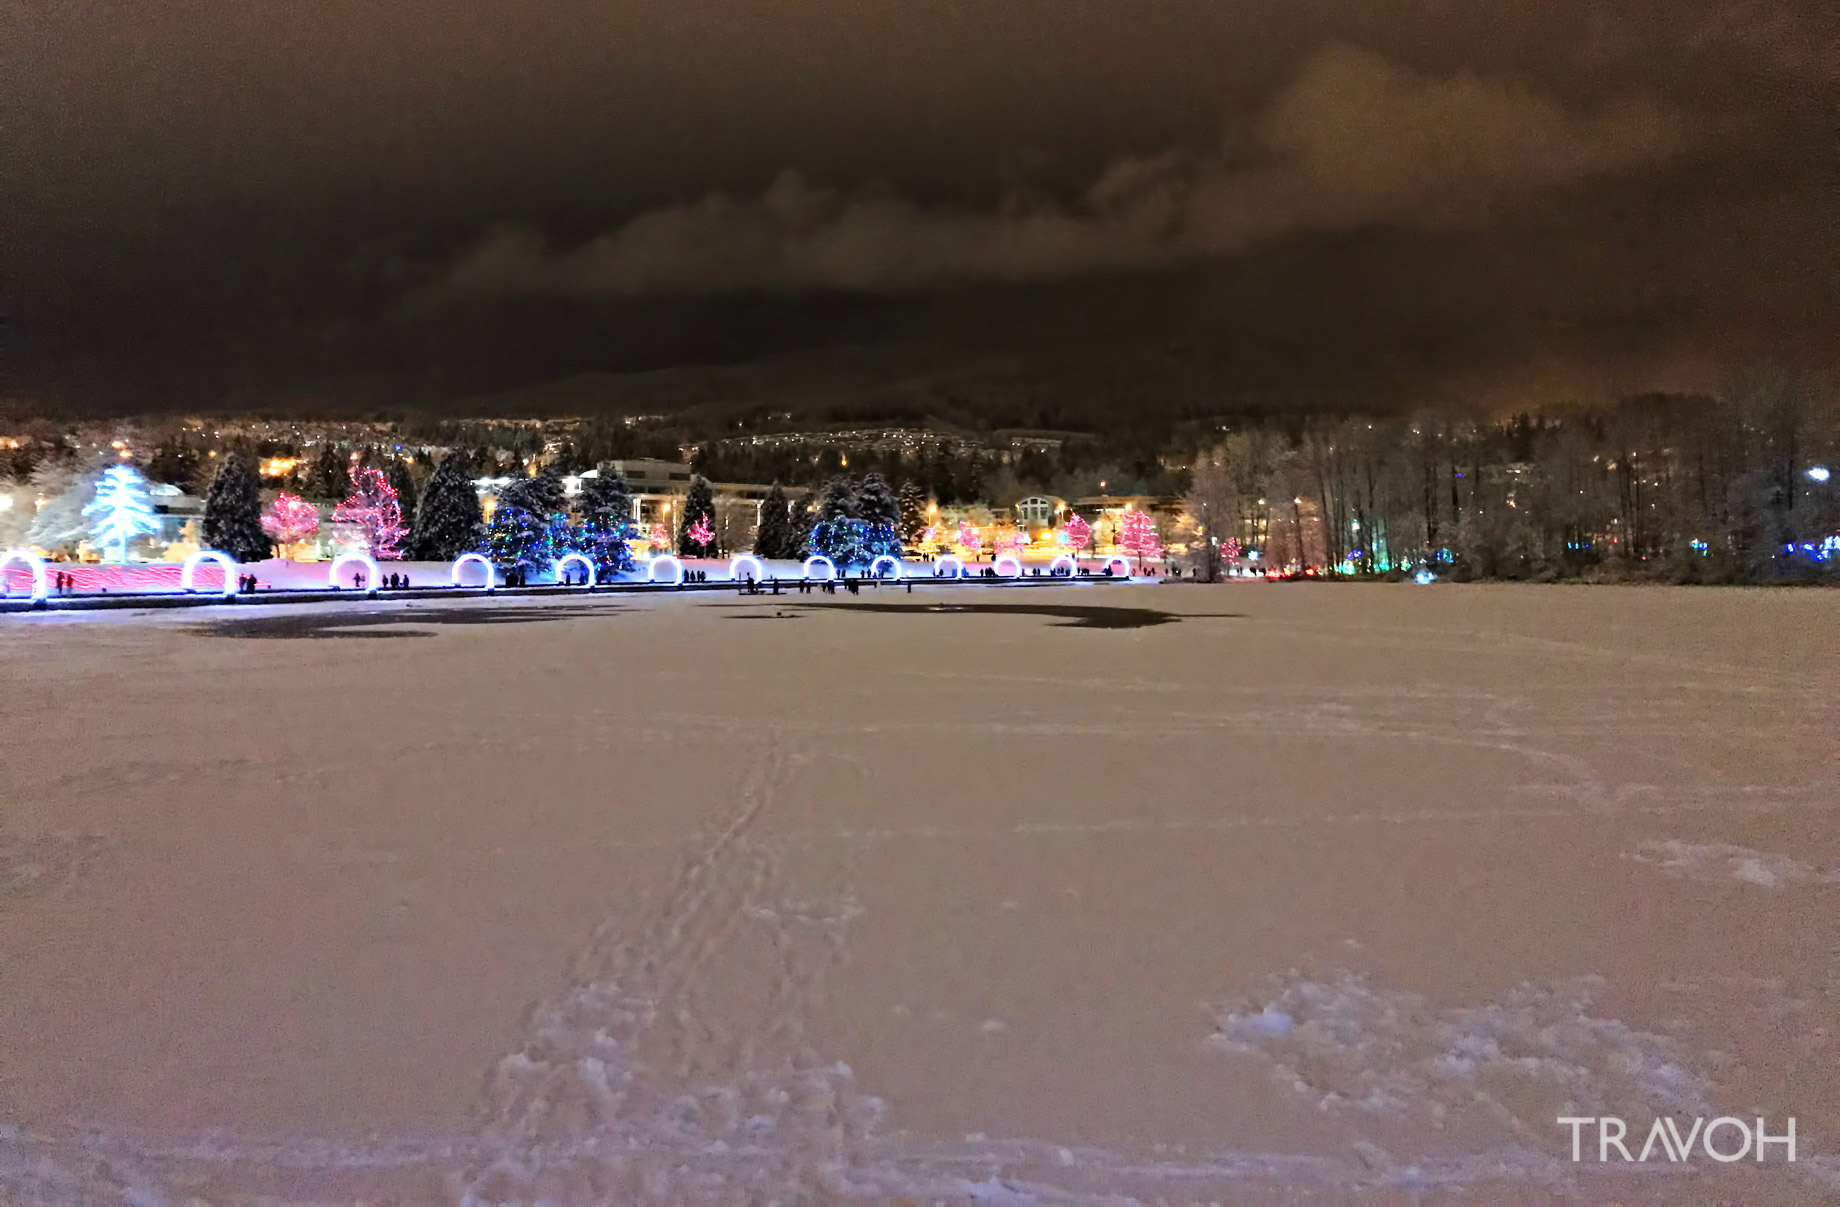 Lafarge Winter Lights Display - Spectacle for the Holiday Season and New Year Celebration